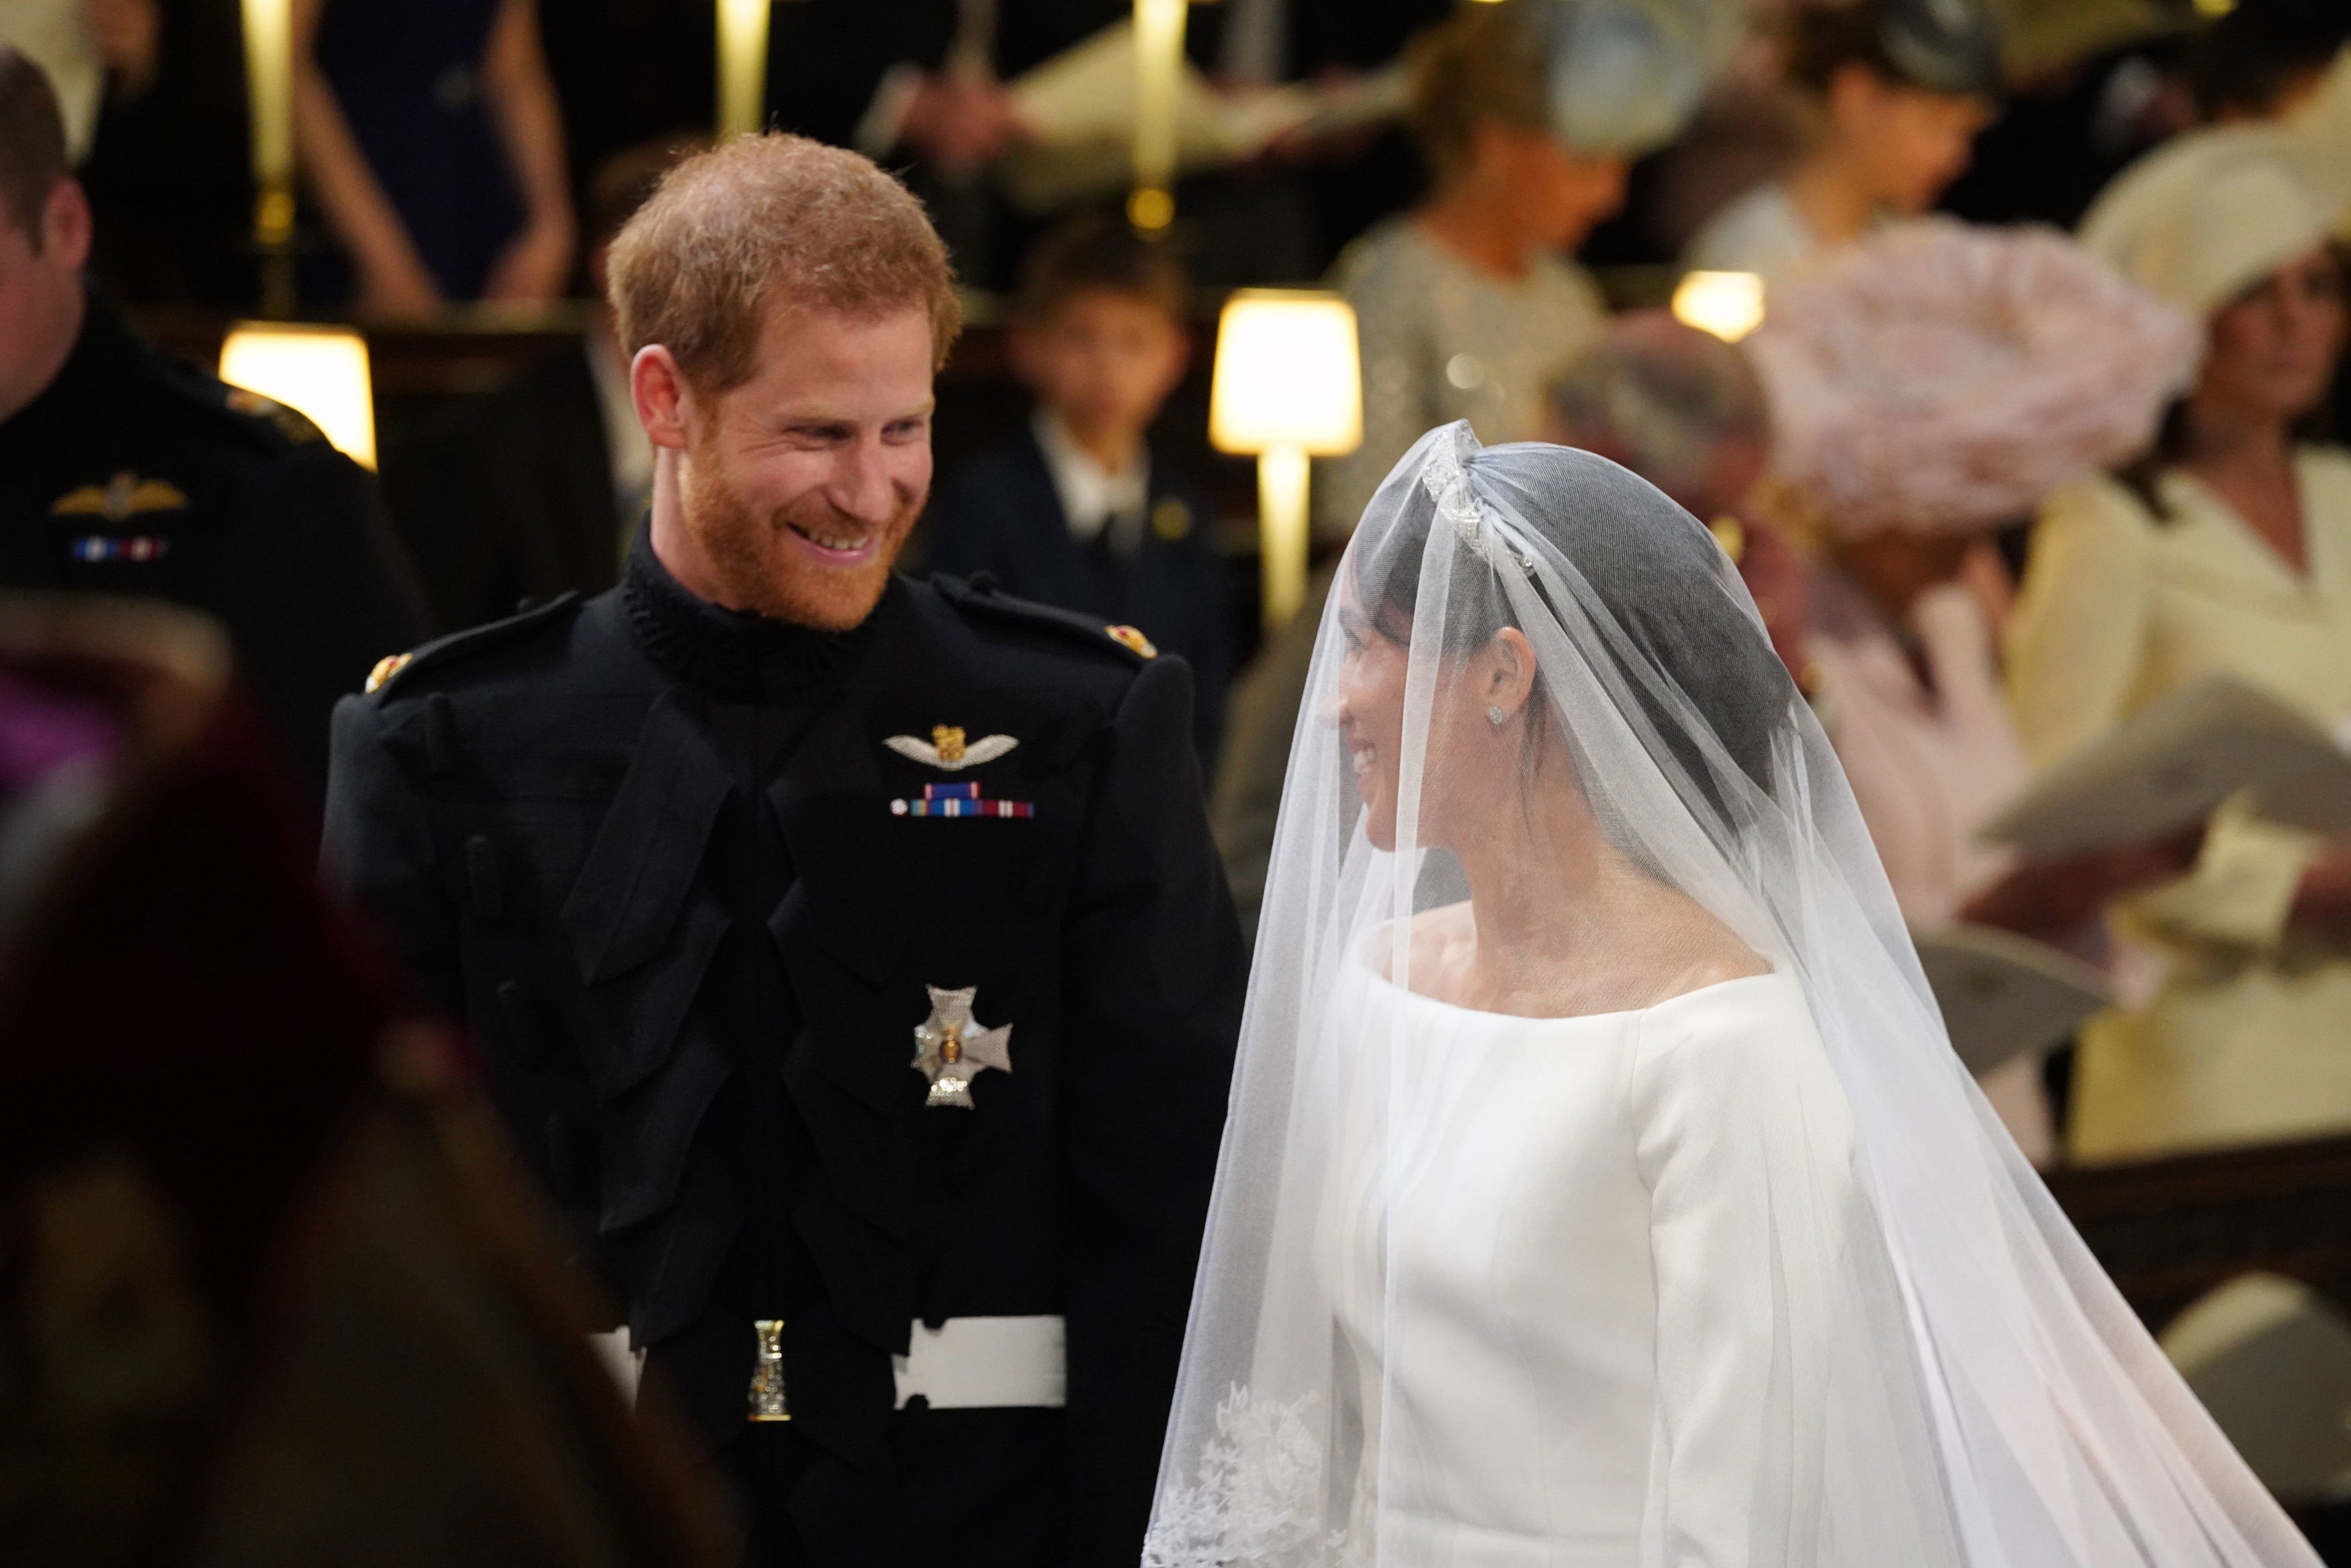 Queen Elizabeth reportedly thought Meghan Markle’s wedding dress was ‘too white’